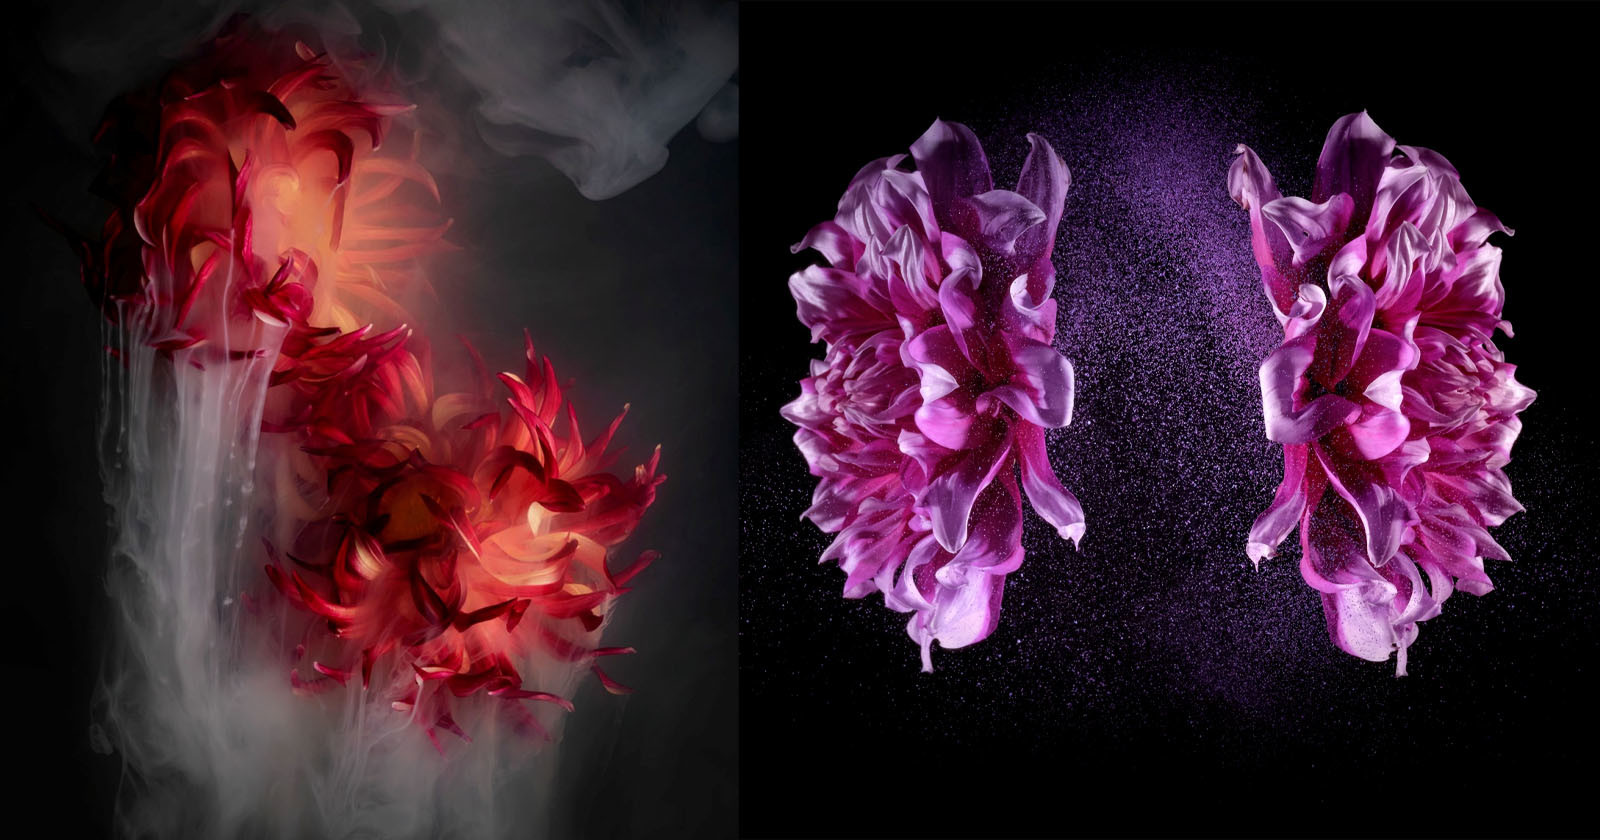 Flower Portrait Series is a Modern Take on an Ancient Japanese Art